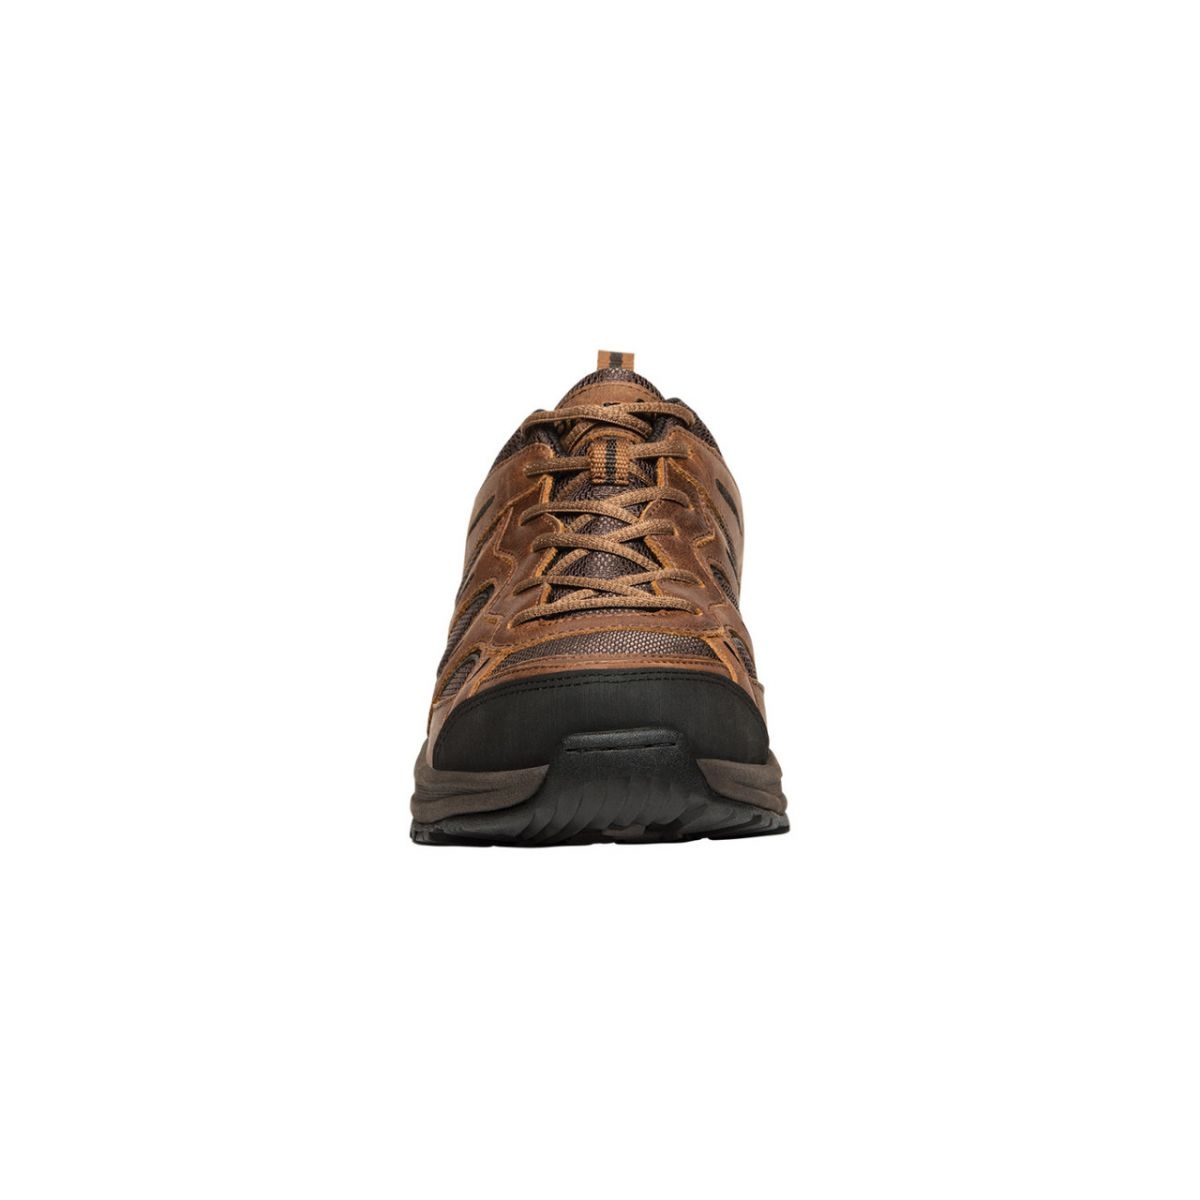 Propet Men's Connelly Hiking Shoe Brown - M5503BR BROWN - BROWN, 10-3E